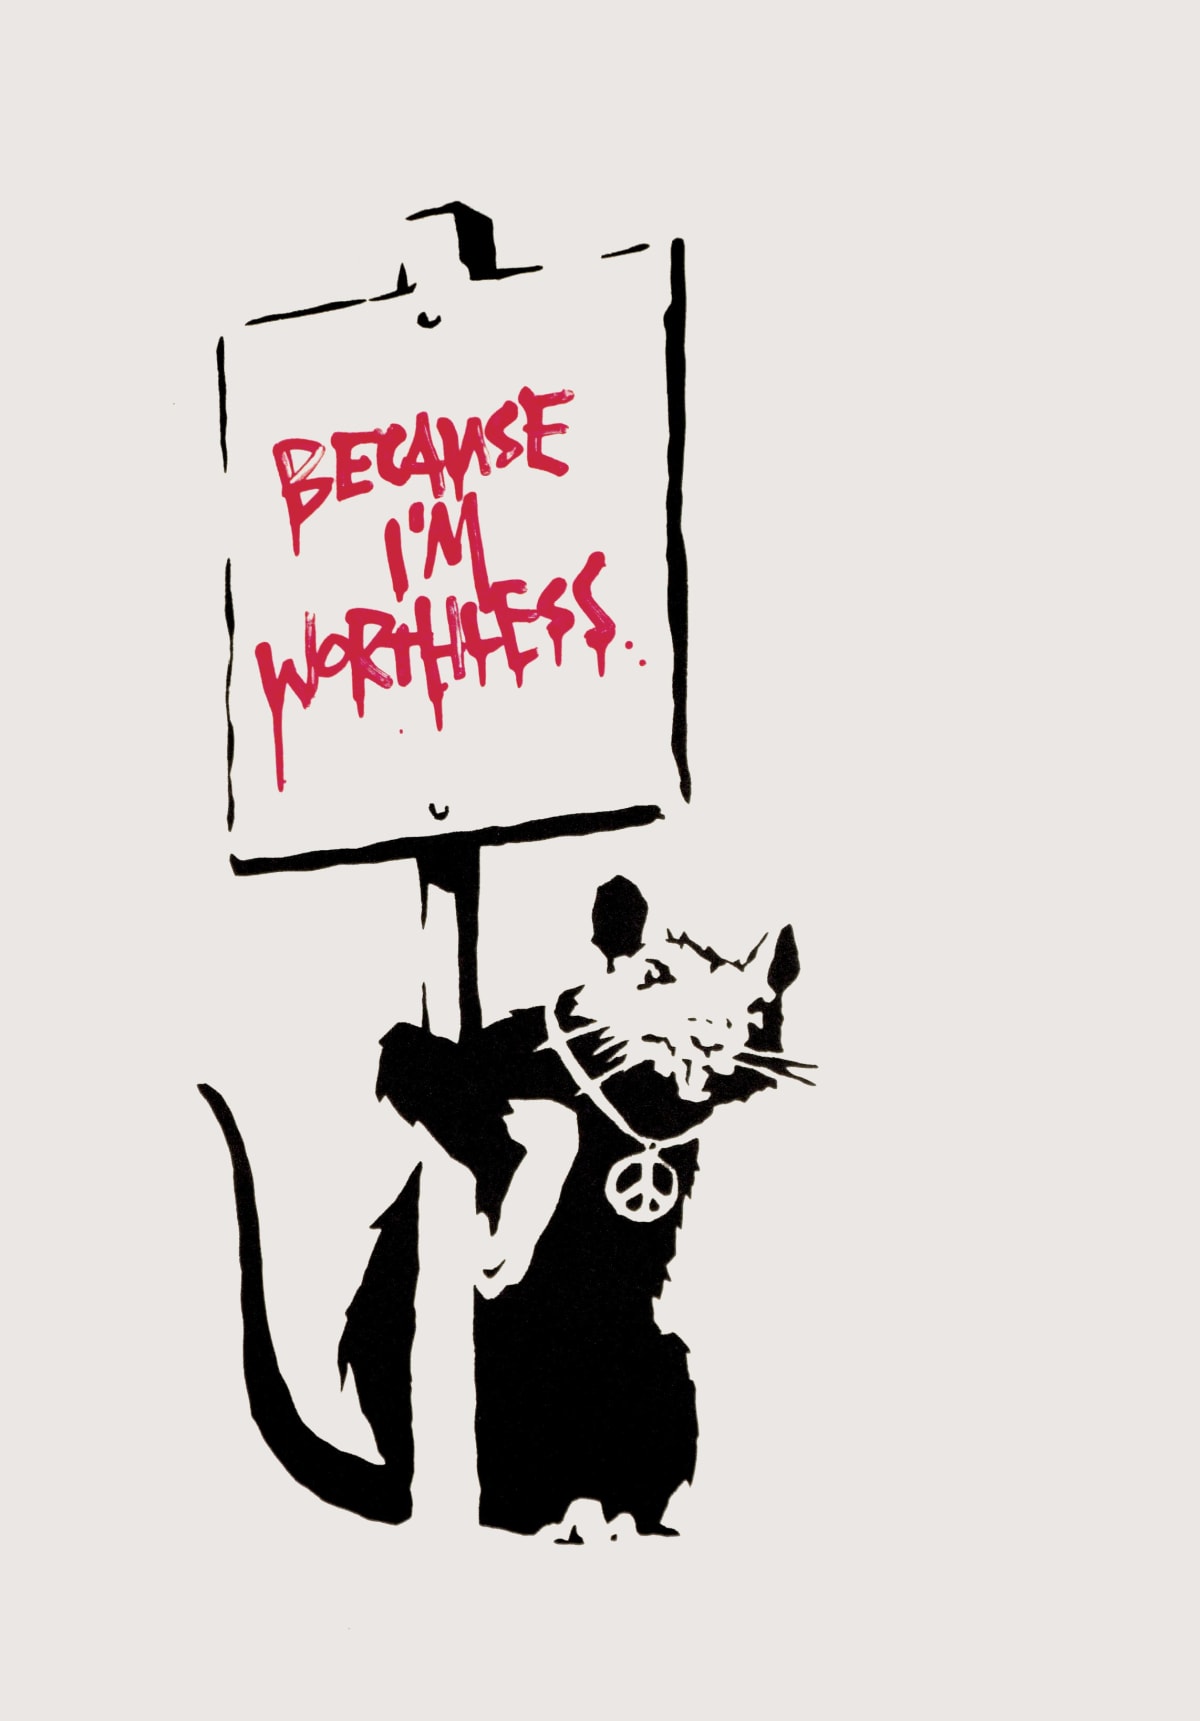 Banksy Because I'm worthless Print for sale and Meaning